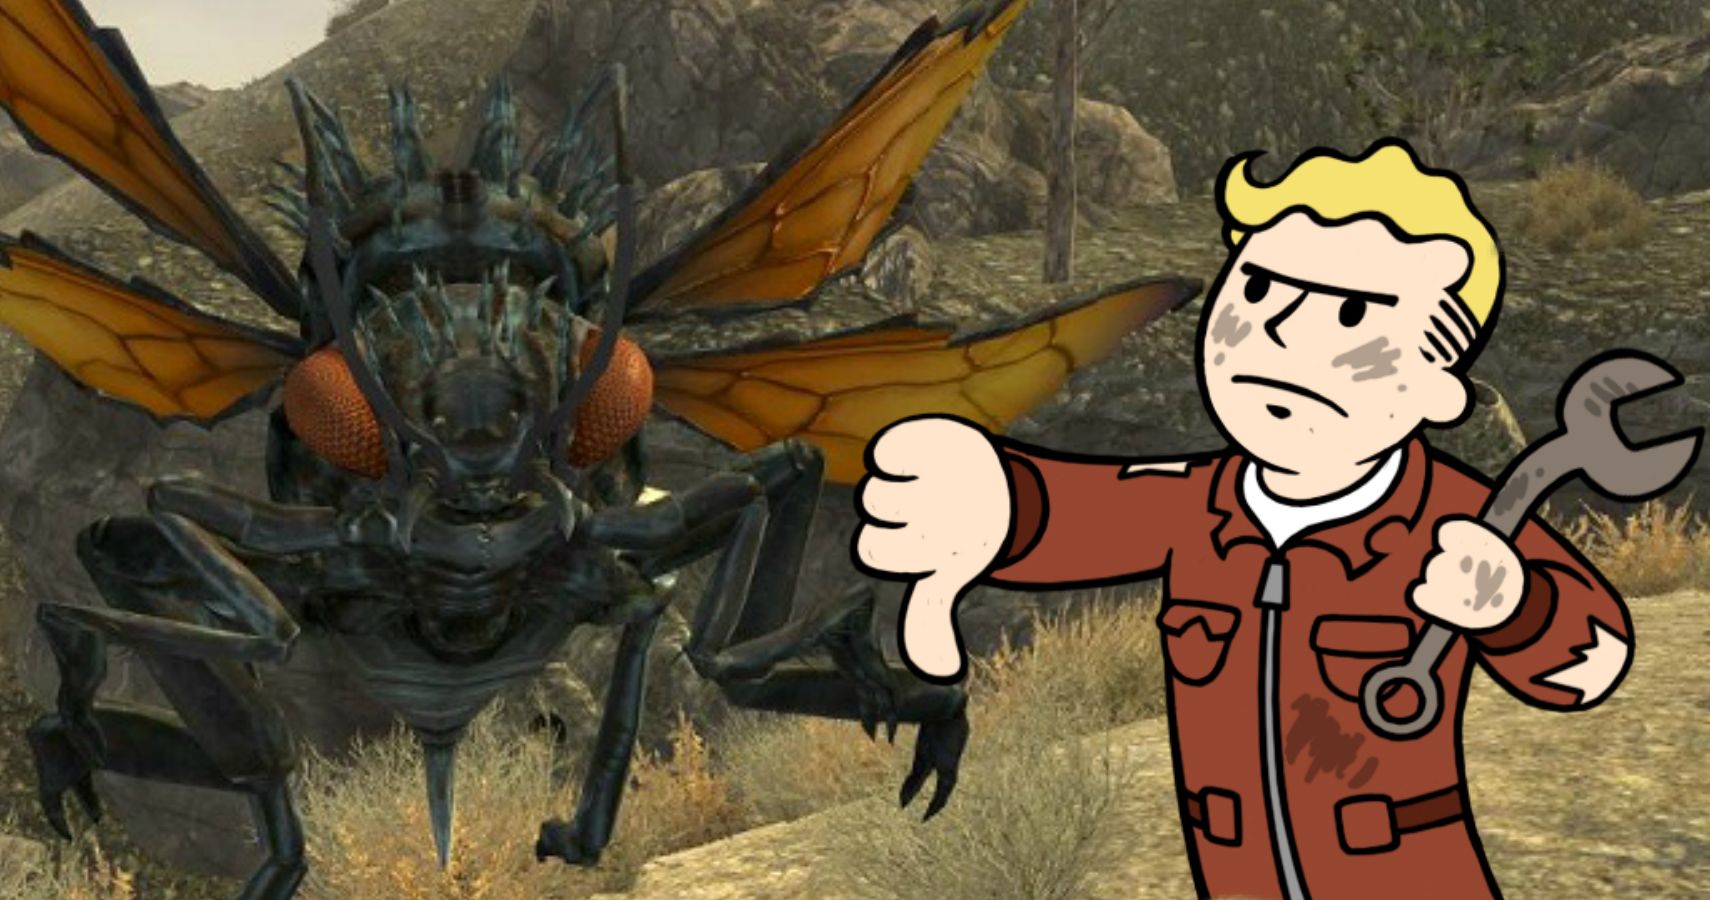 Fallout 76 Data Miner Banned Despite Efforts To Help Bethesda